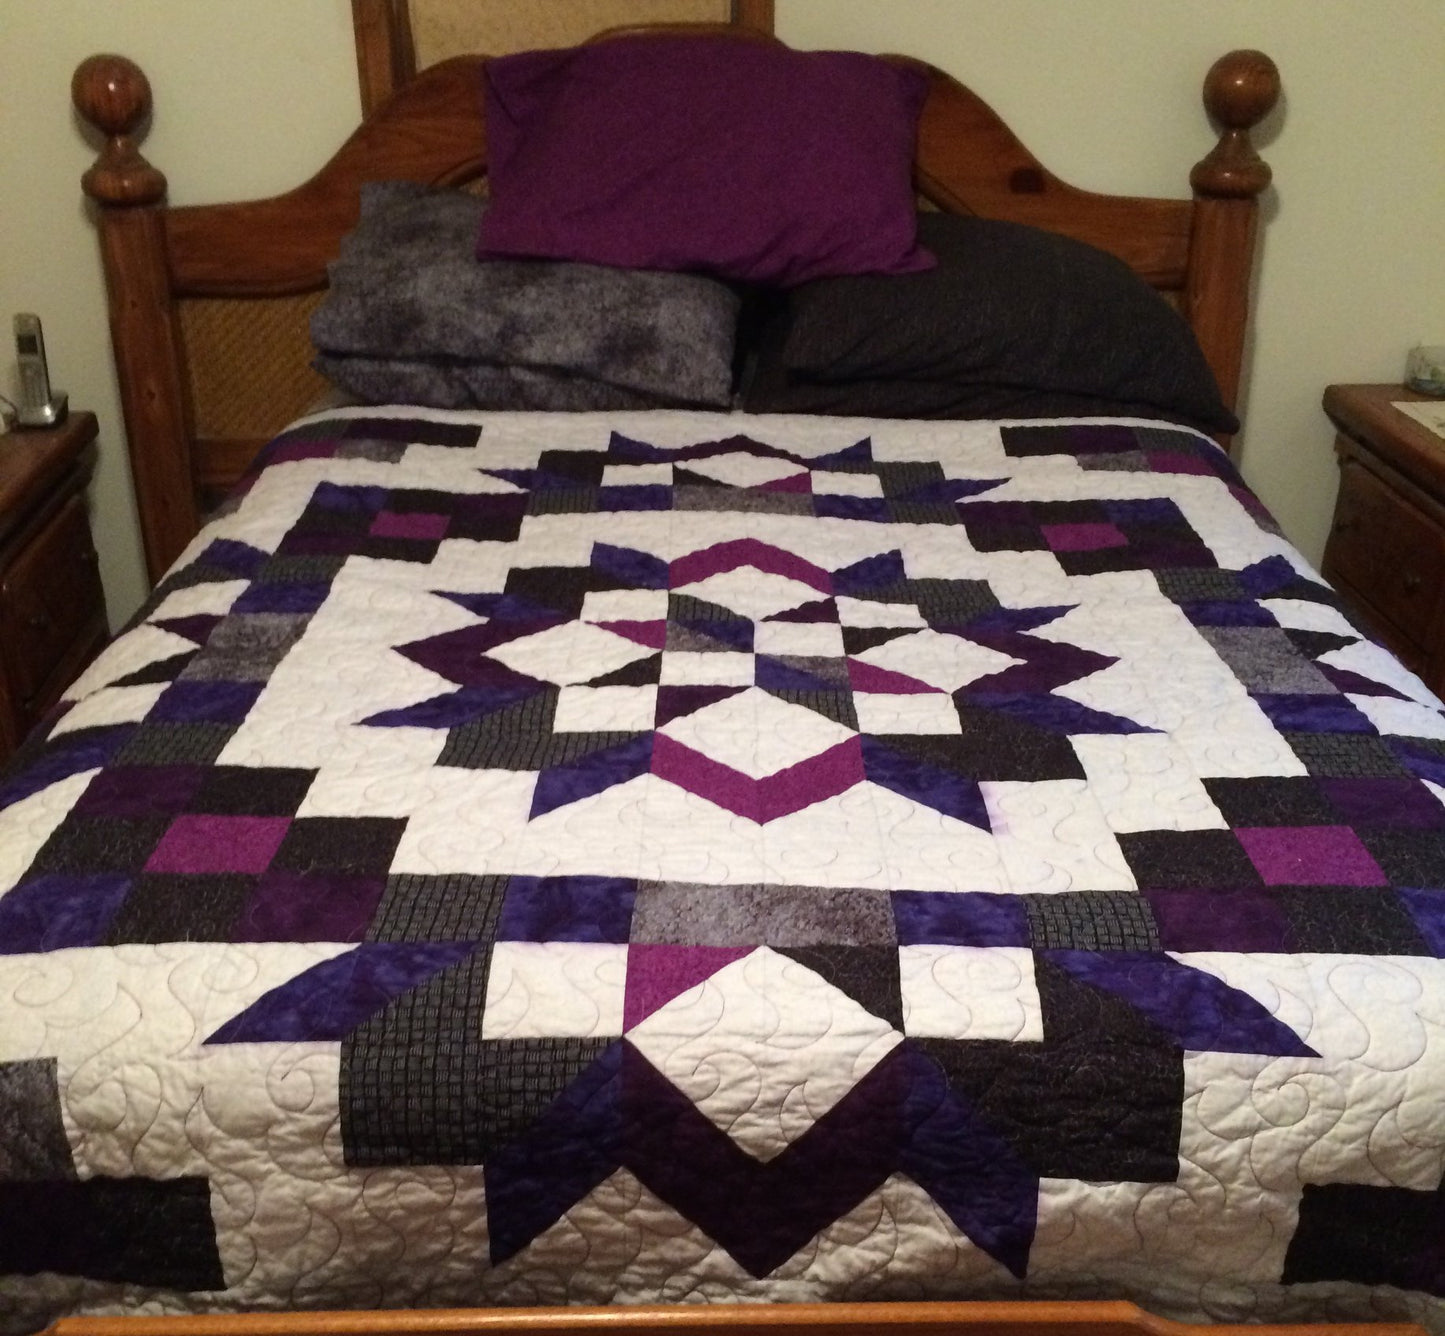 One Star Quilt Pattern - Quilts From the Country @ Quilt & Sew